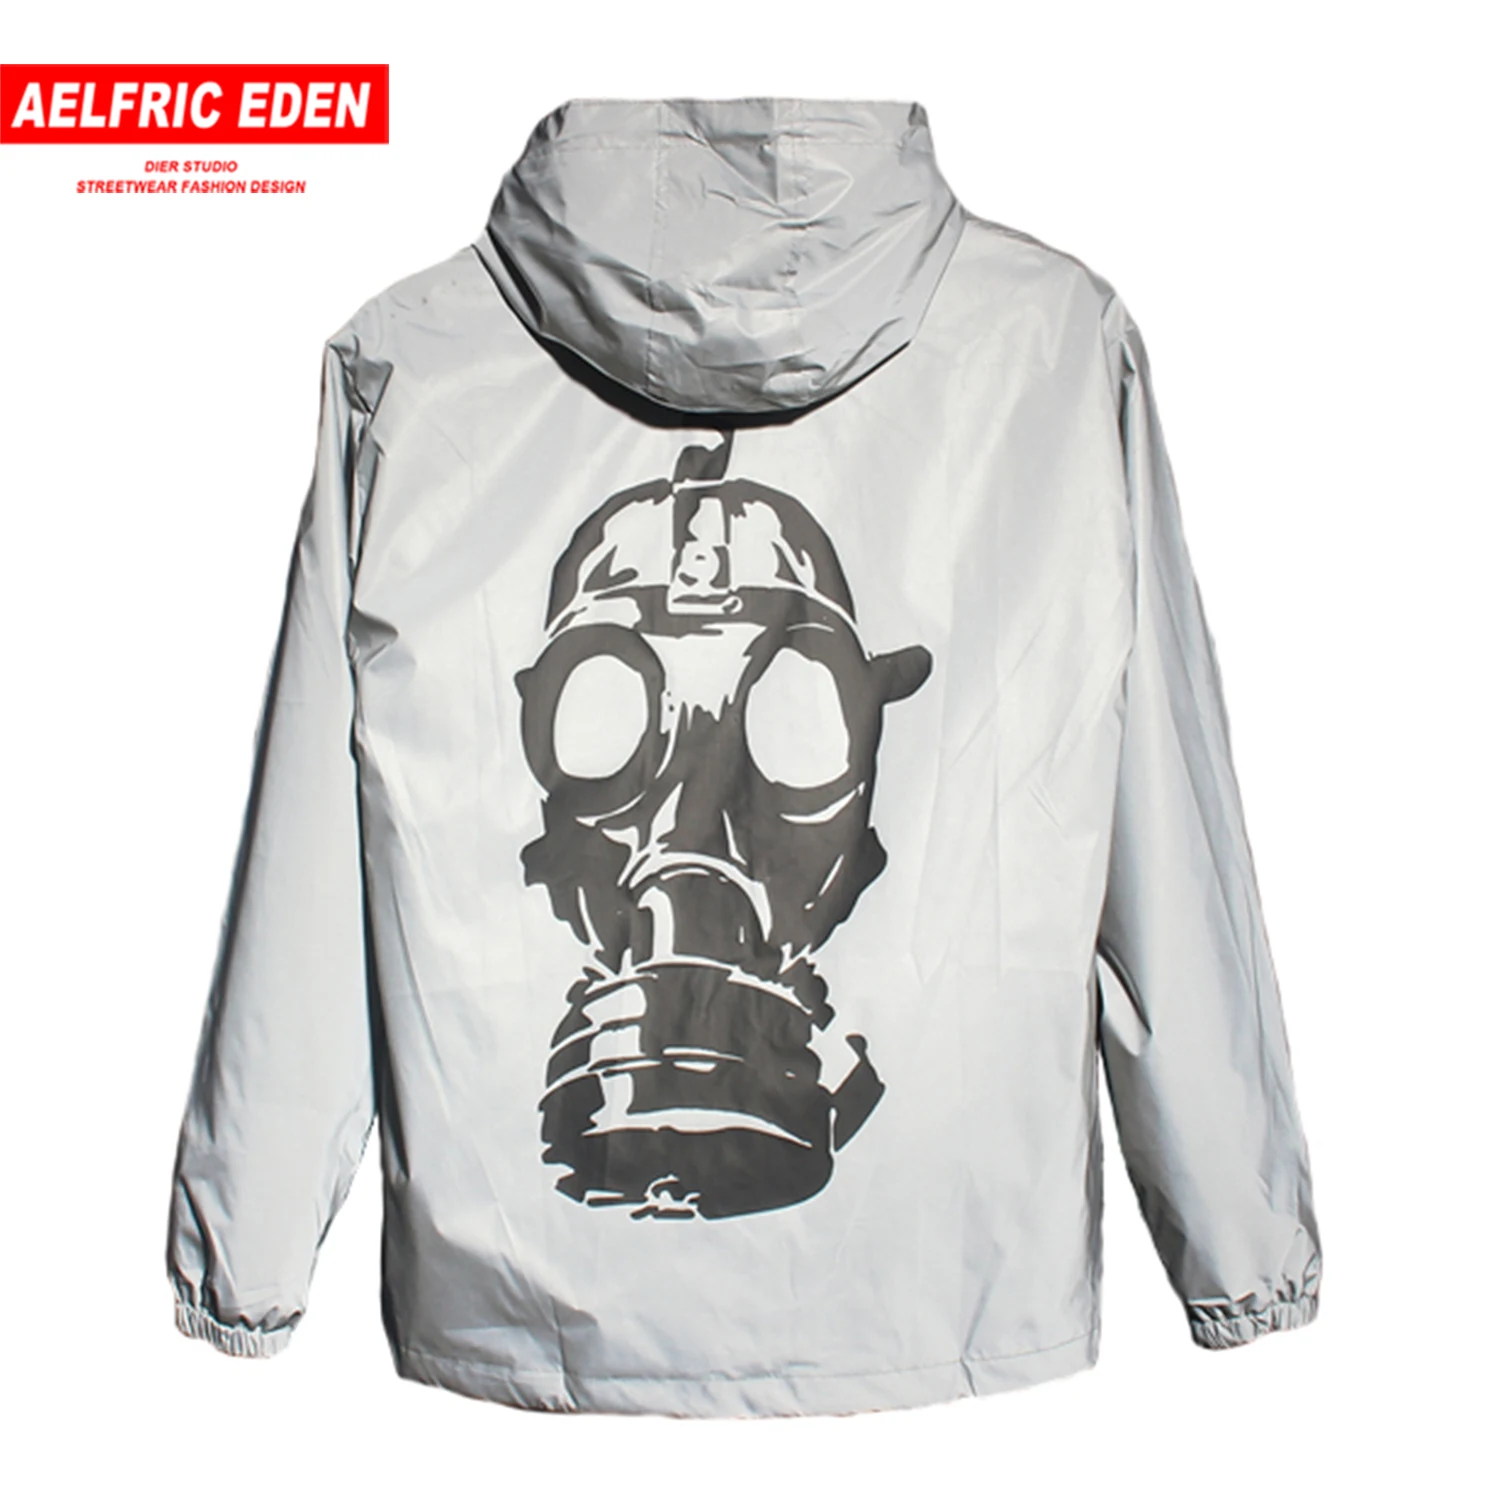 

Aelfric Eden Mister Printed Men Trench 2019 Harajuku Fashion Reflective Hooded Jacket Streetwear Hip Hop Casual Cotton Male Coat